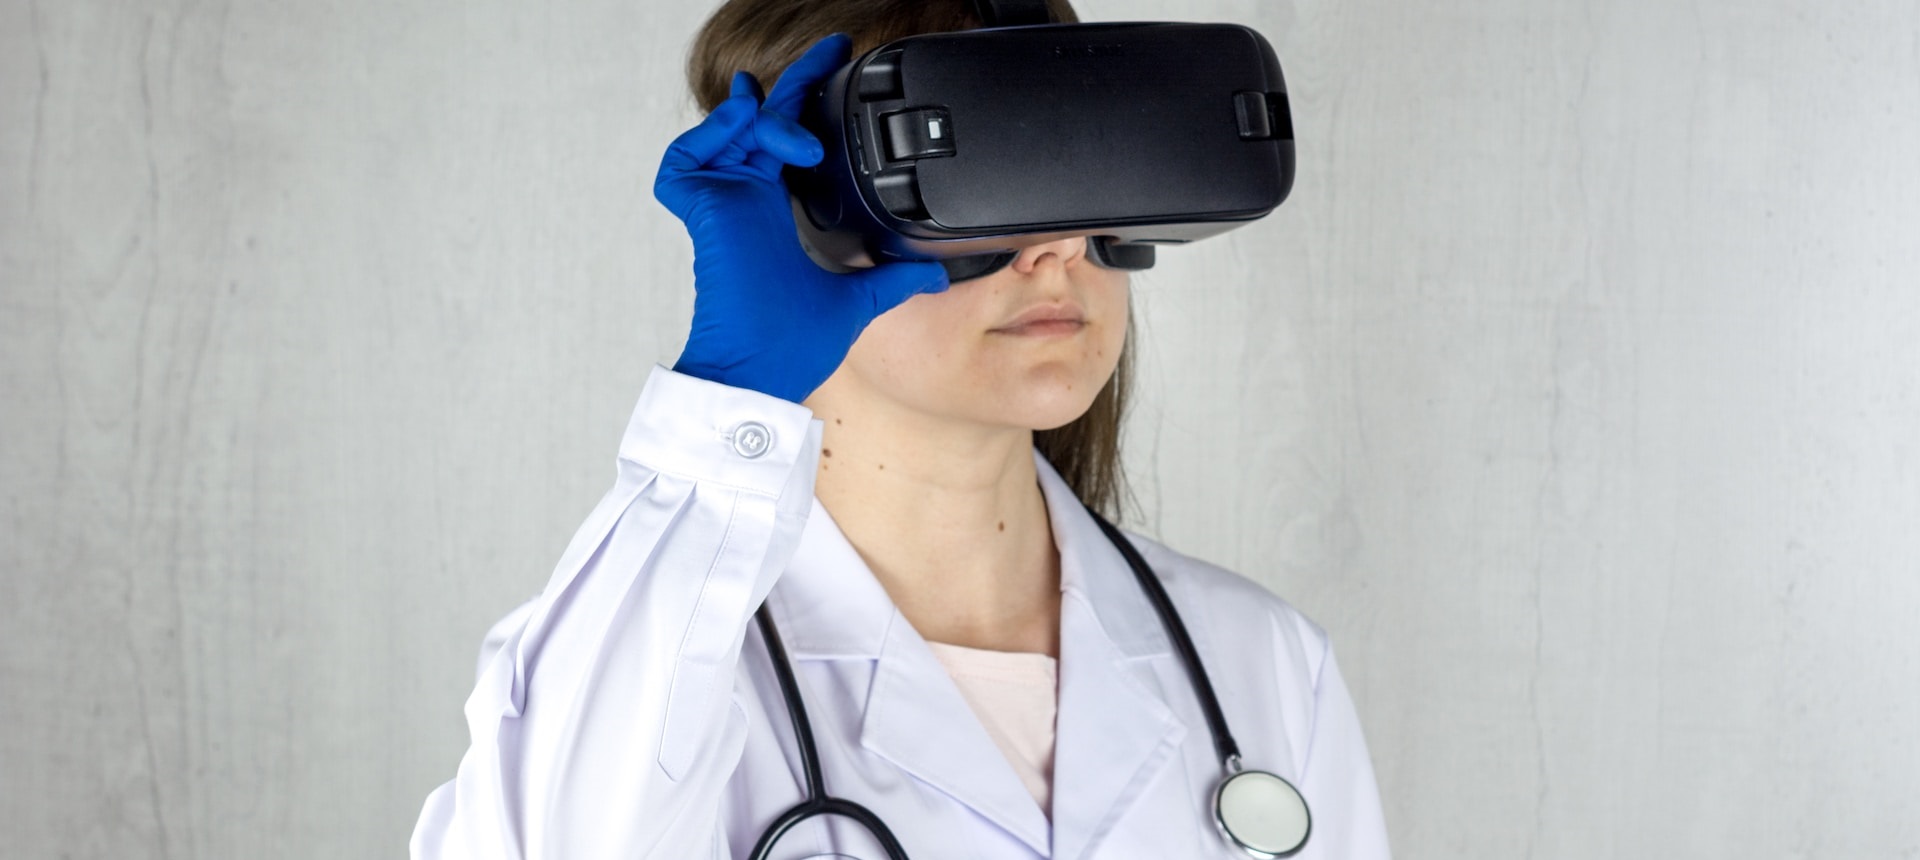 Woman in lab coat with a stethoscope around her neck using a VR headset.